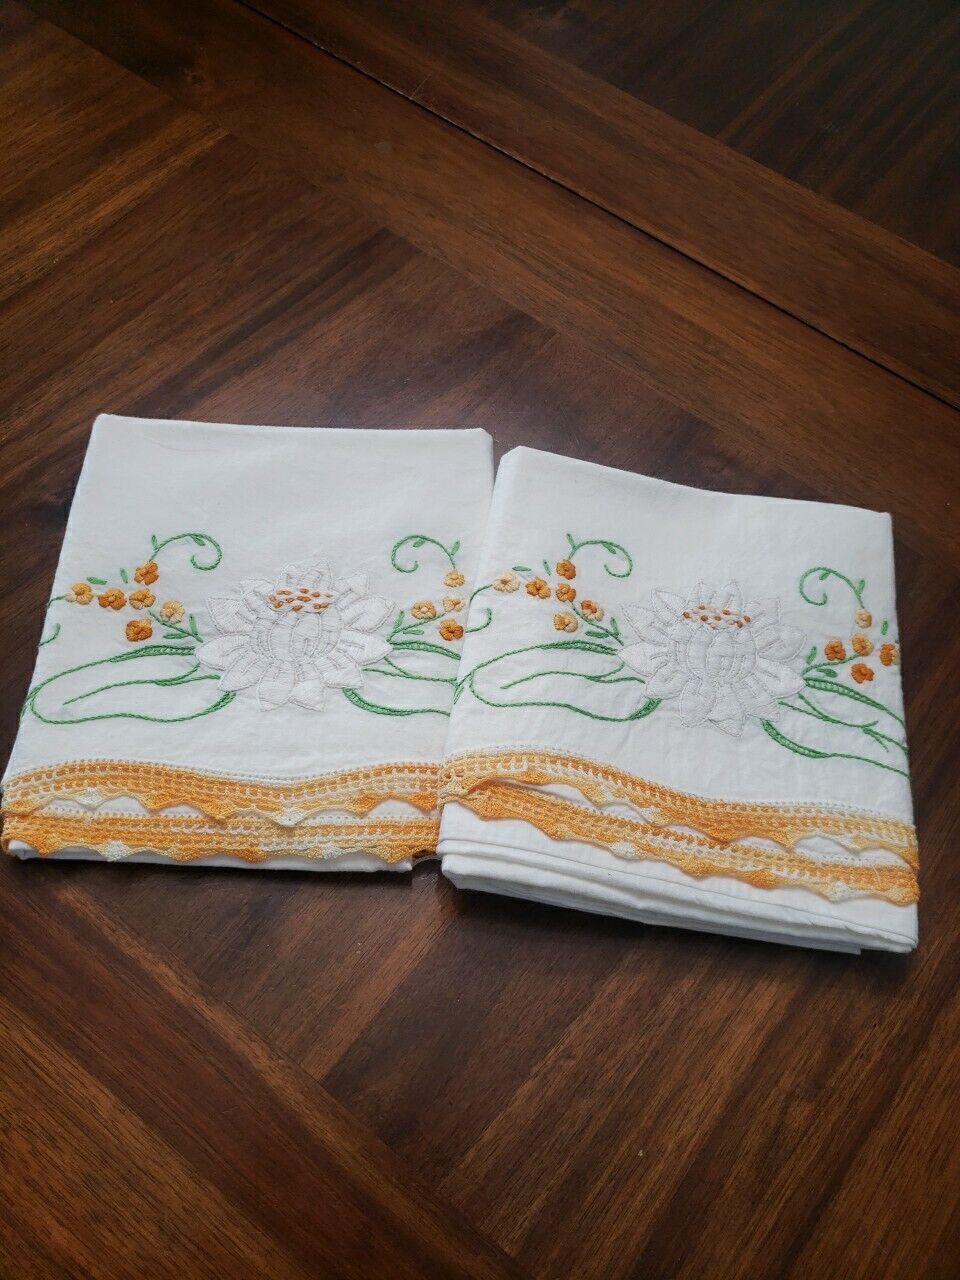 2 Embroidered Pillowcases Crochet Lace Edge Floral New, Laundered 